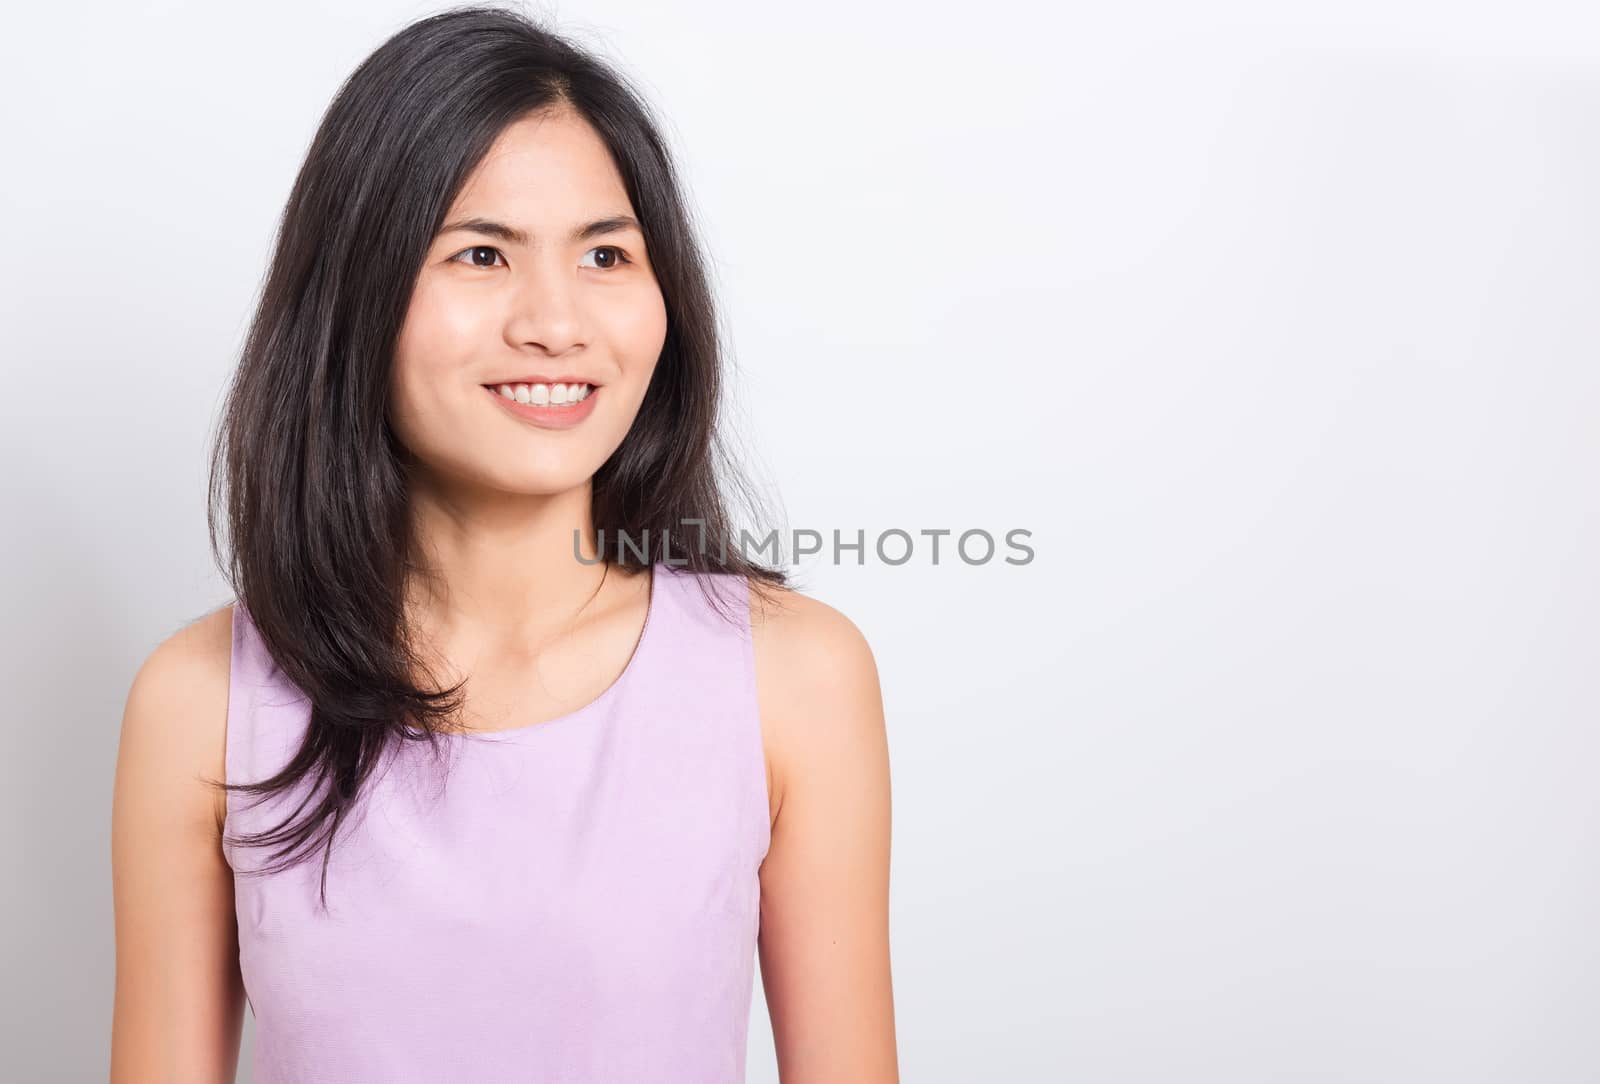 Portrait Asian beautiful young woman standing smile seeing white teeth, She looking at the camera, shoot photo in studio on white background. There was a copy space to put text on the right-hand side.